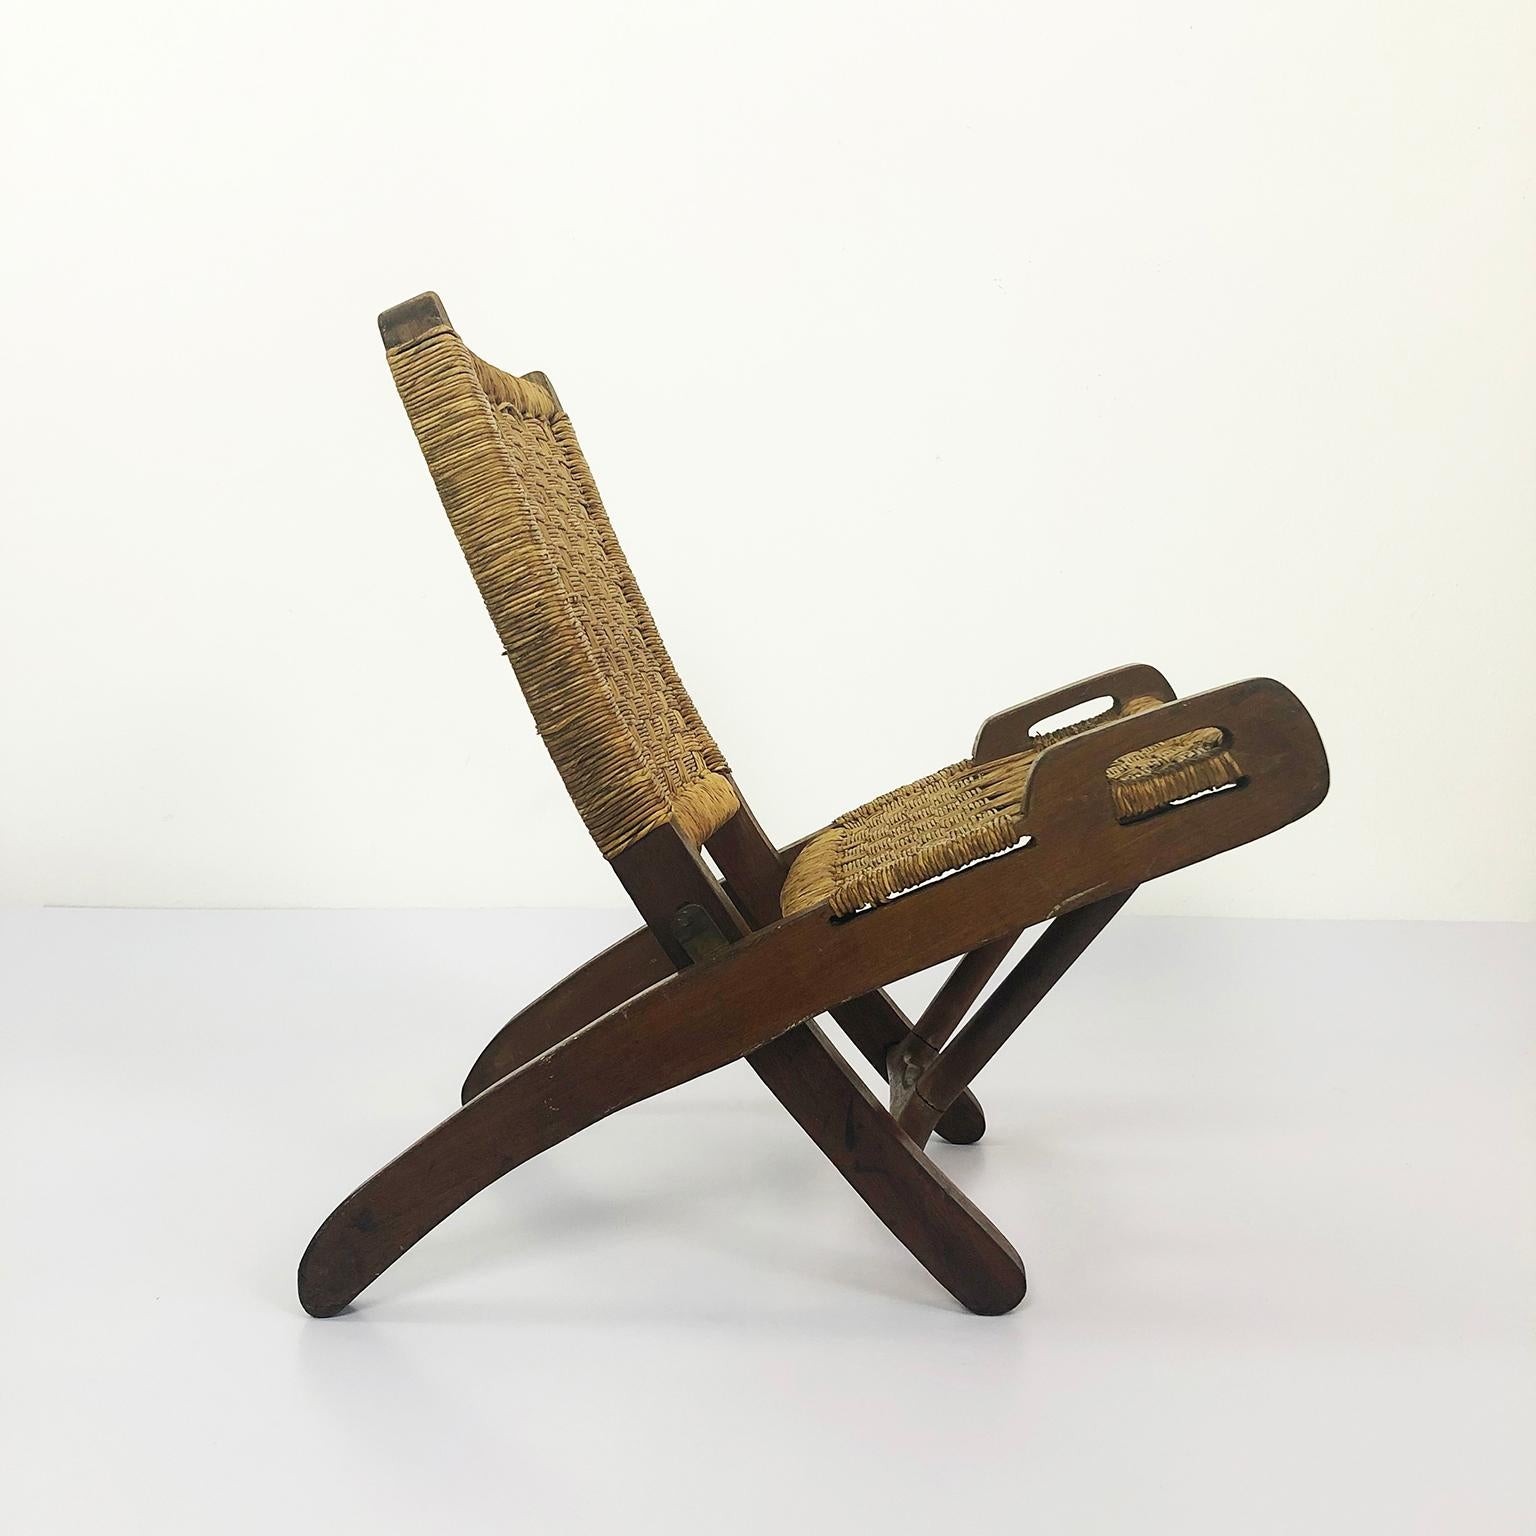 We offer this rare Children Mexican folding chair by Muebles Toluca, circa 1950. Made in primavera wood and natural palm cords.